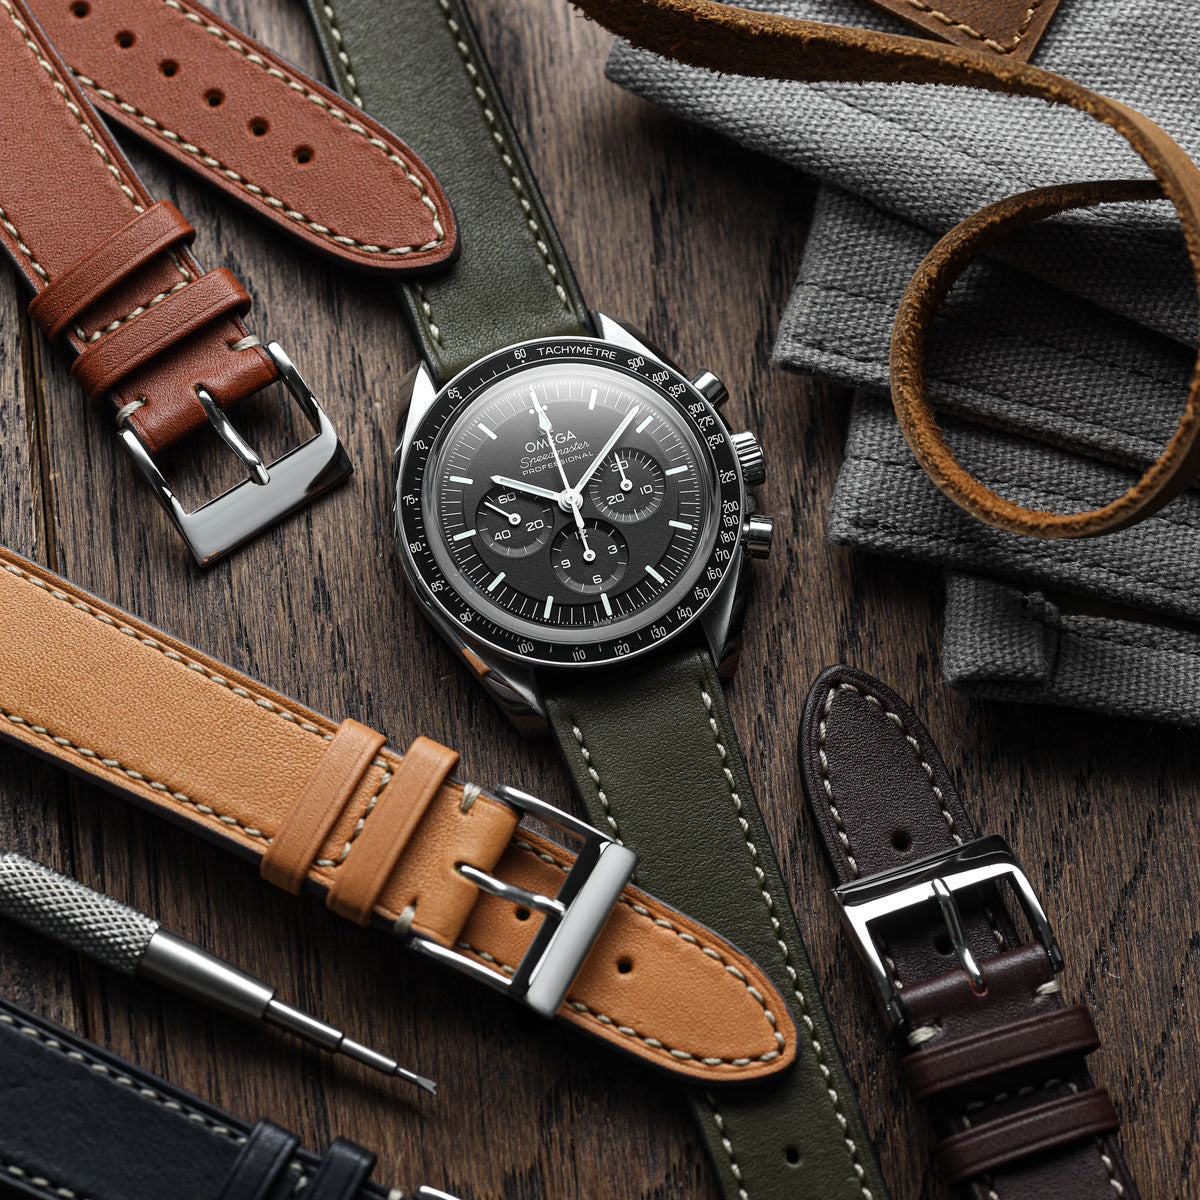 Genuine Leather Watch Straps / Watch Bands